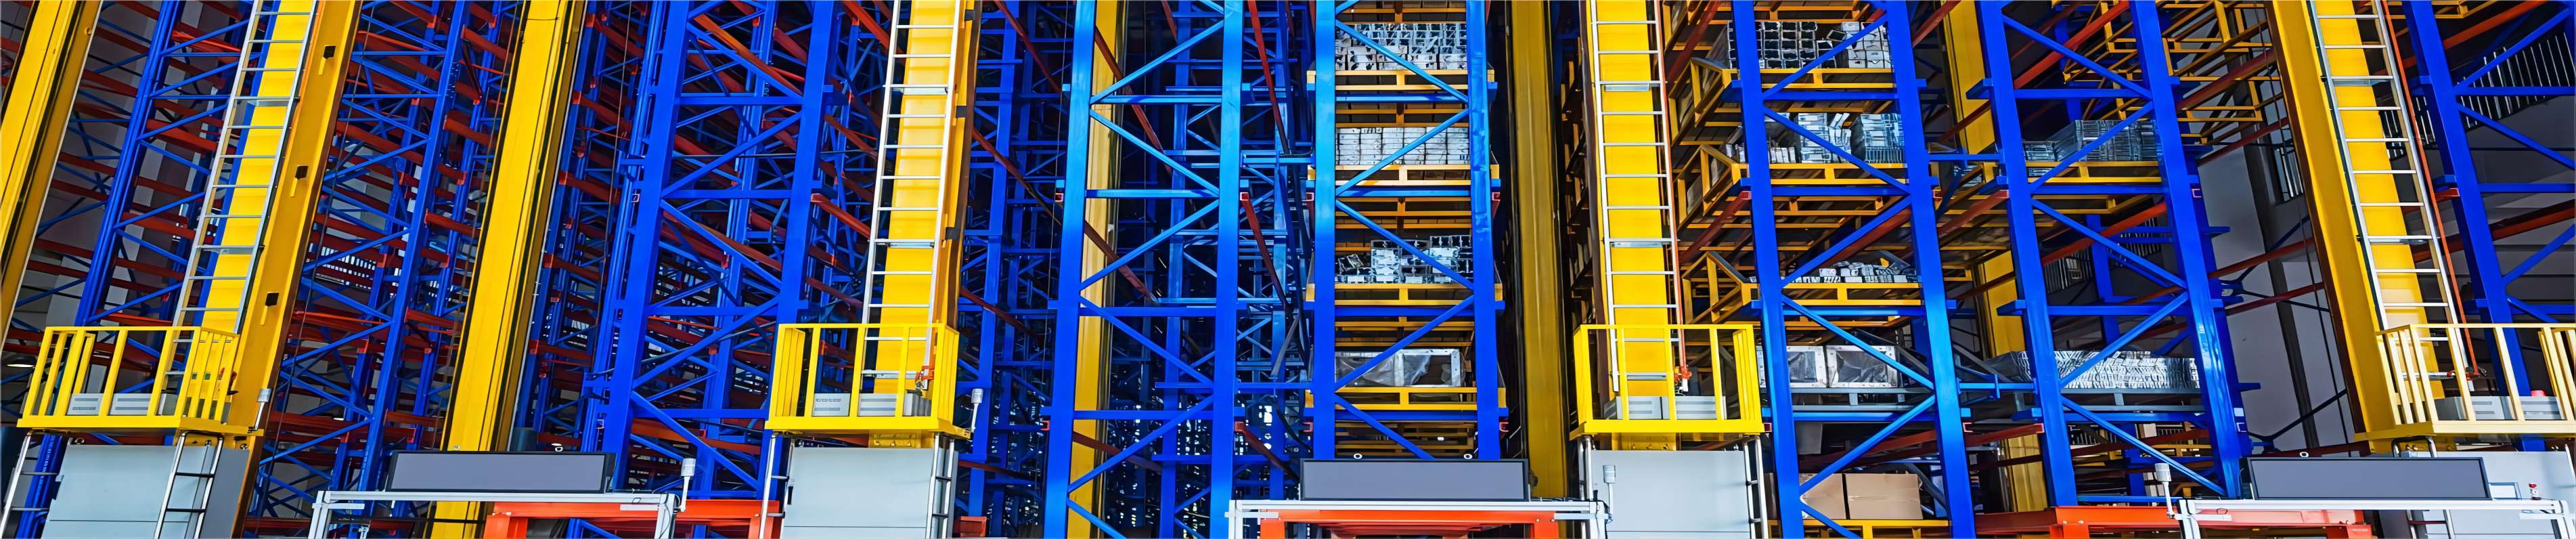 ASRS-Automated Storage and Retrieval Systems